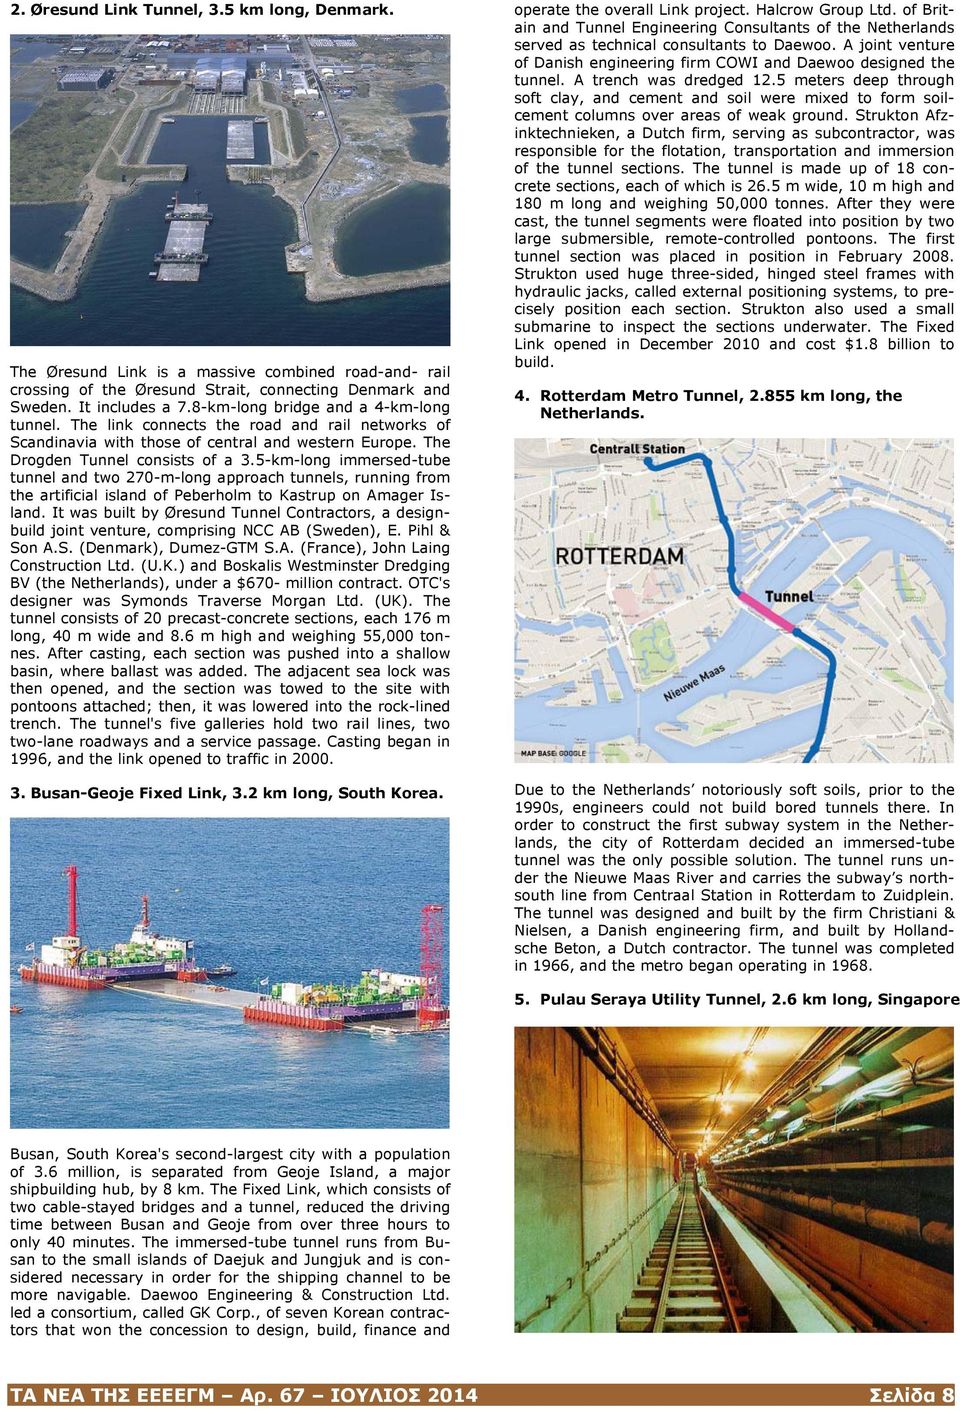 5-km-long immersed-tube tunnel and two 270-m-long approach tunnels, running from the artificial island of Peberholm to Kastrup on Amager Island.